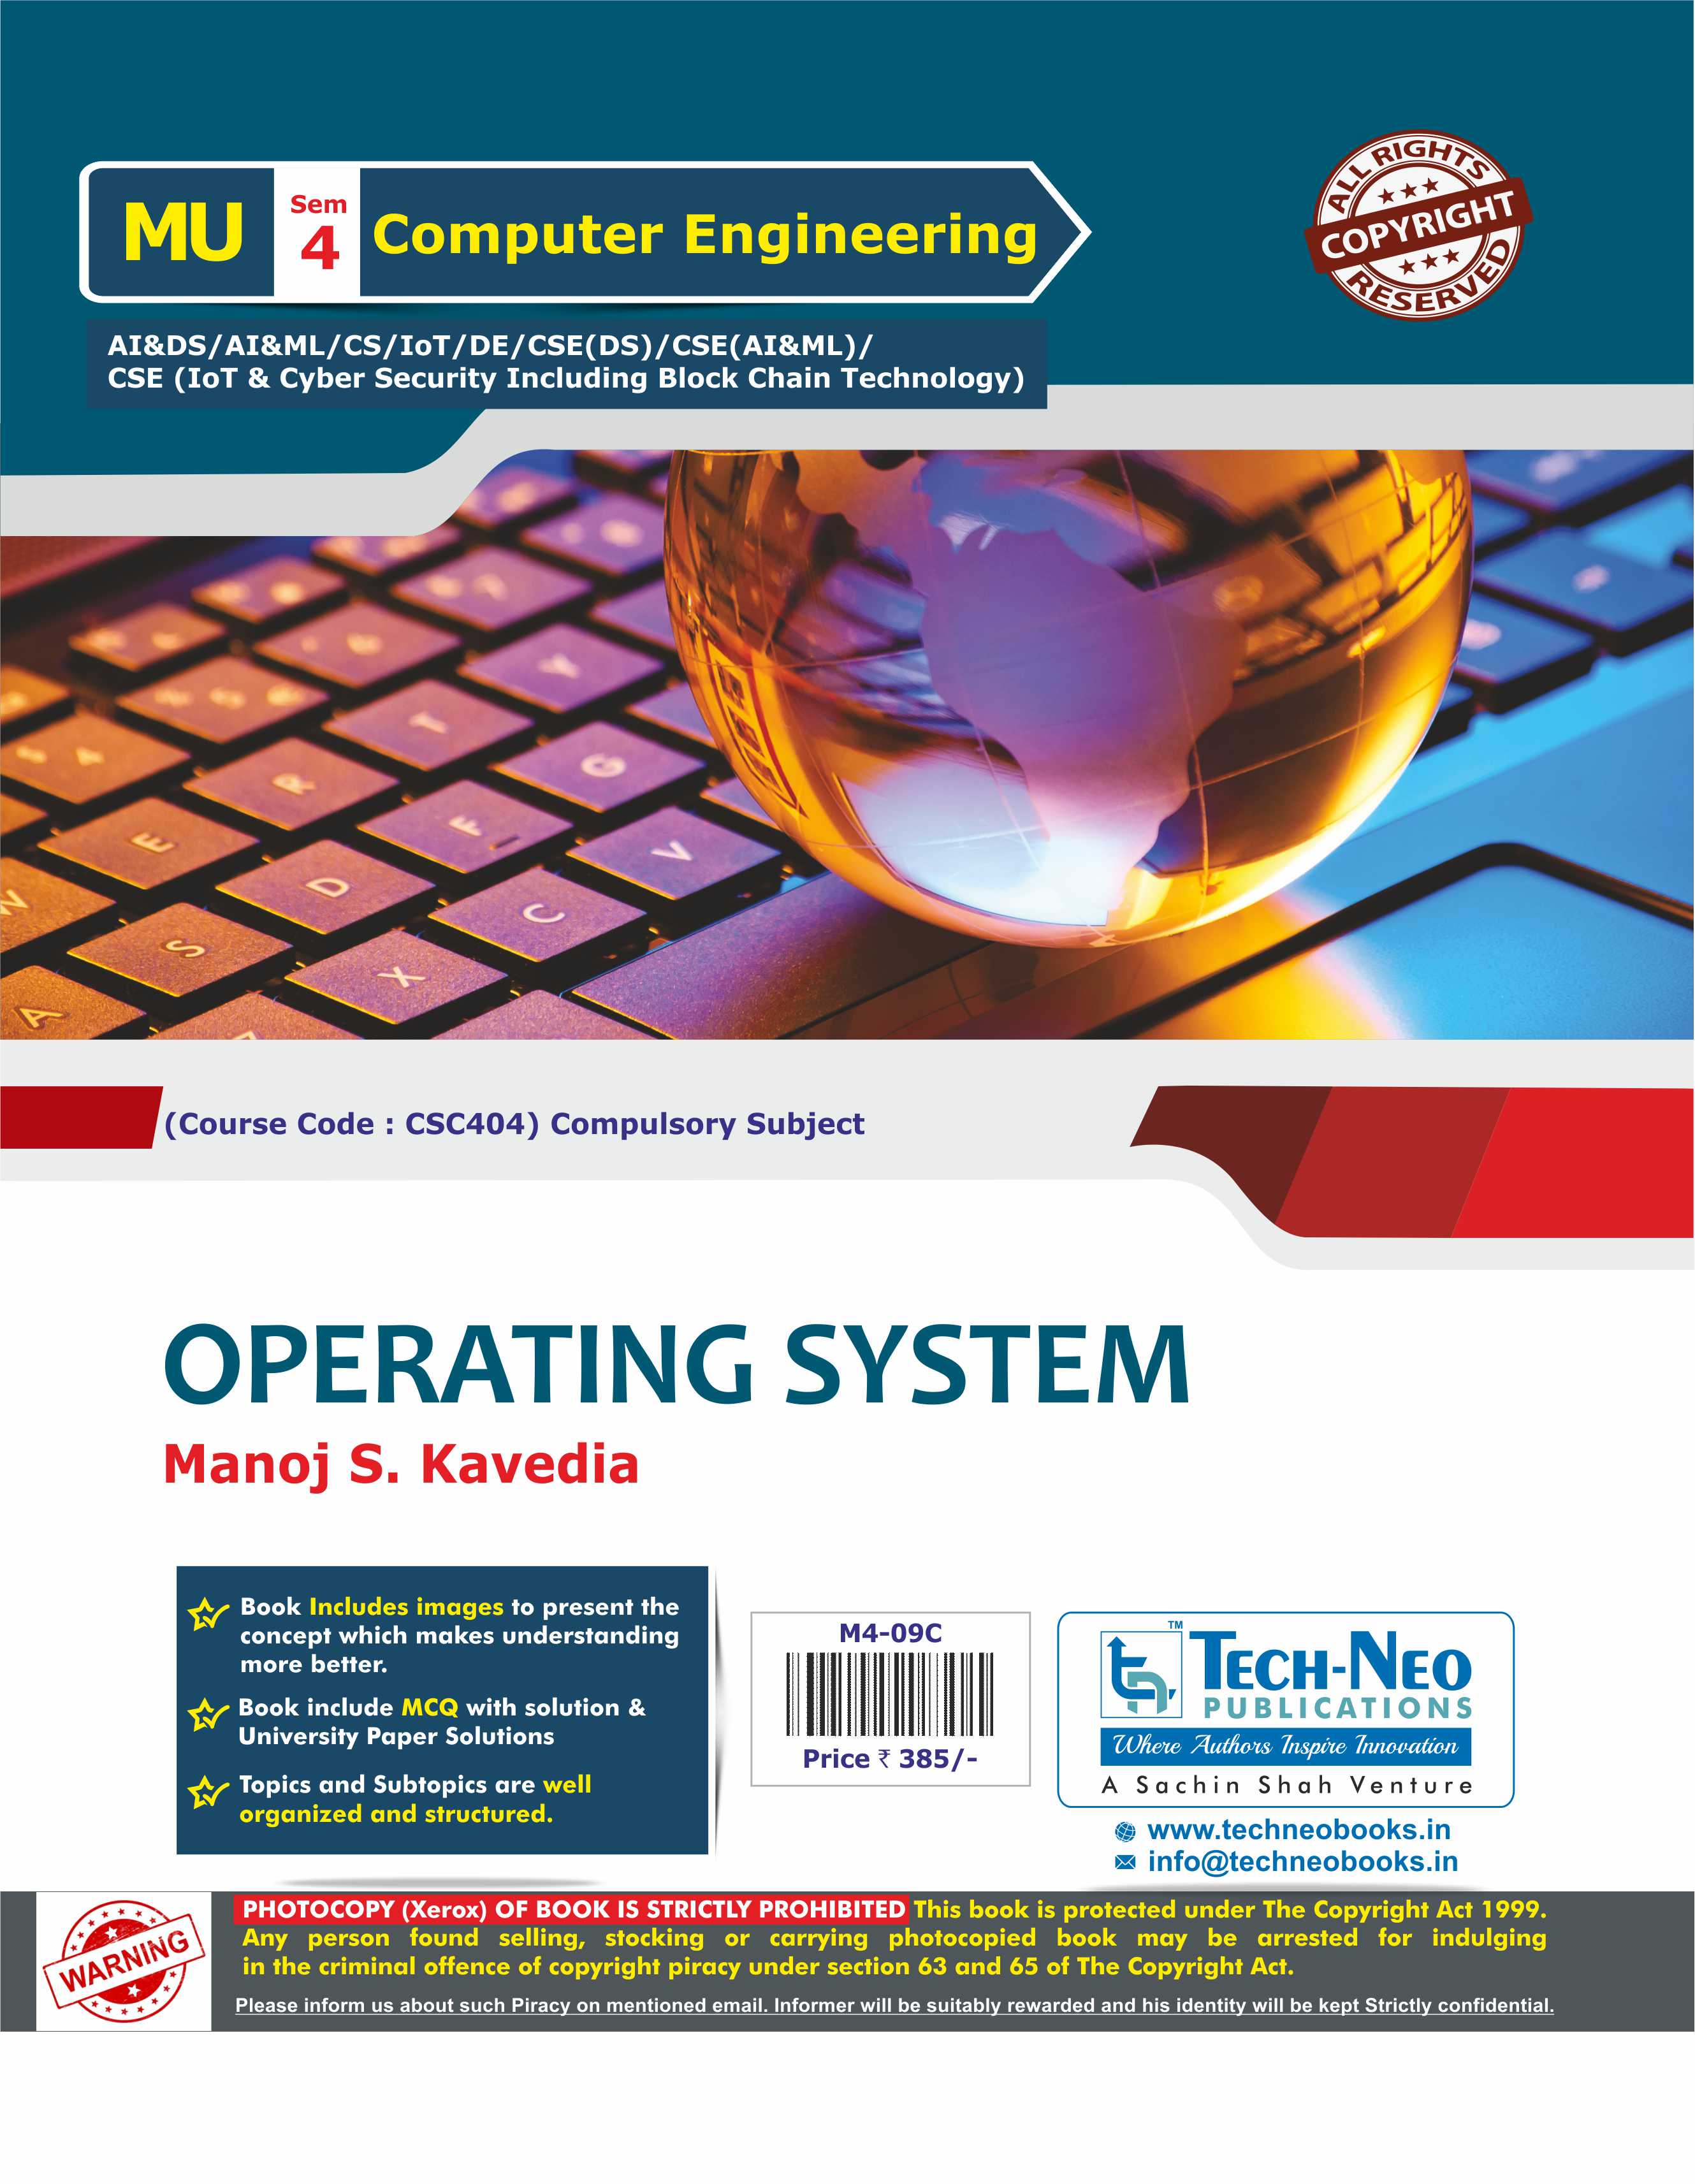 Operating System (CSC404)